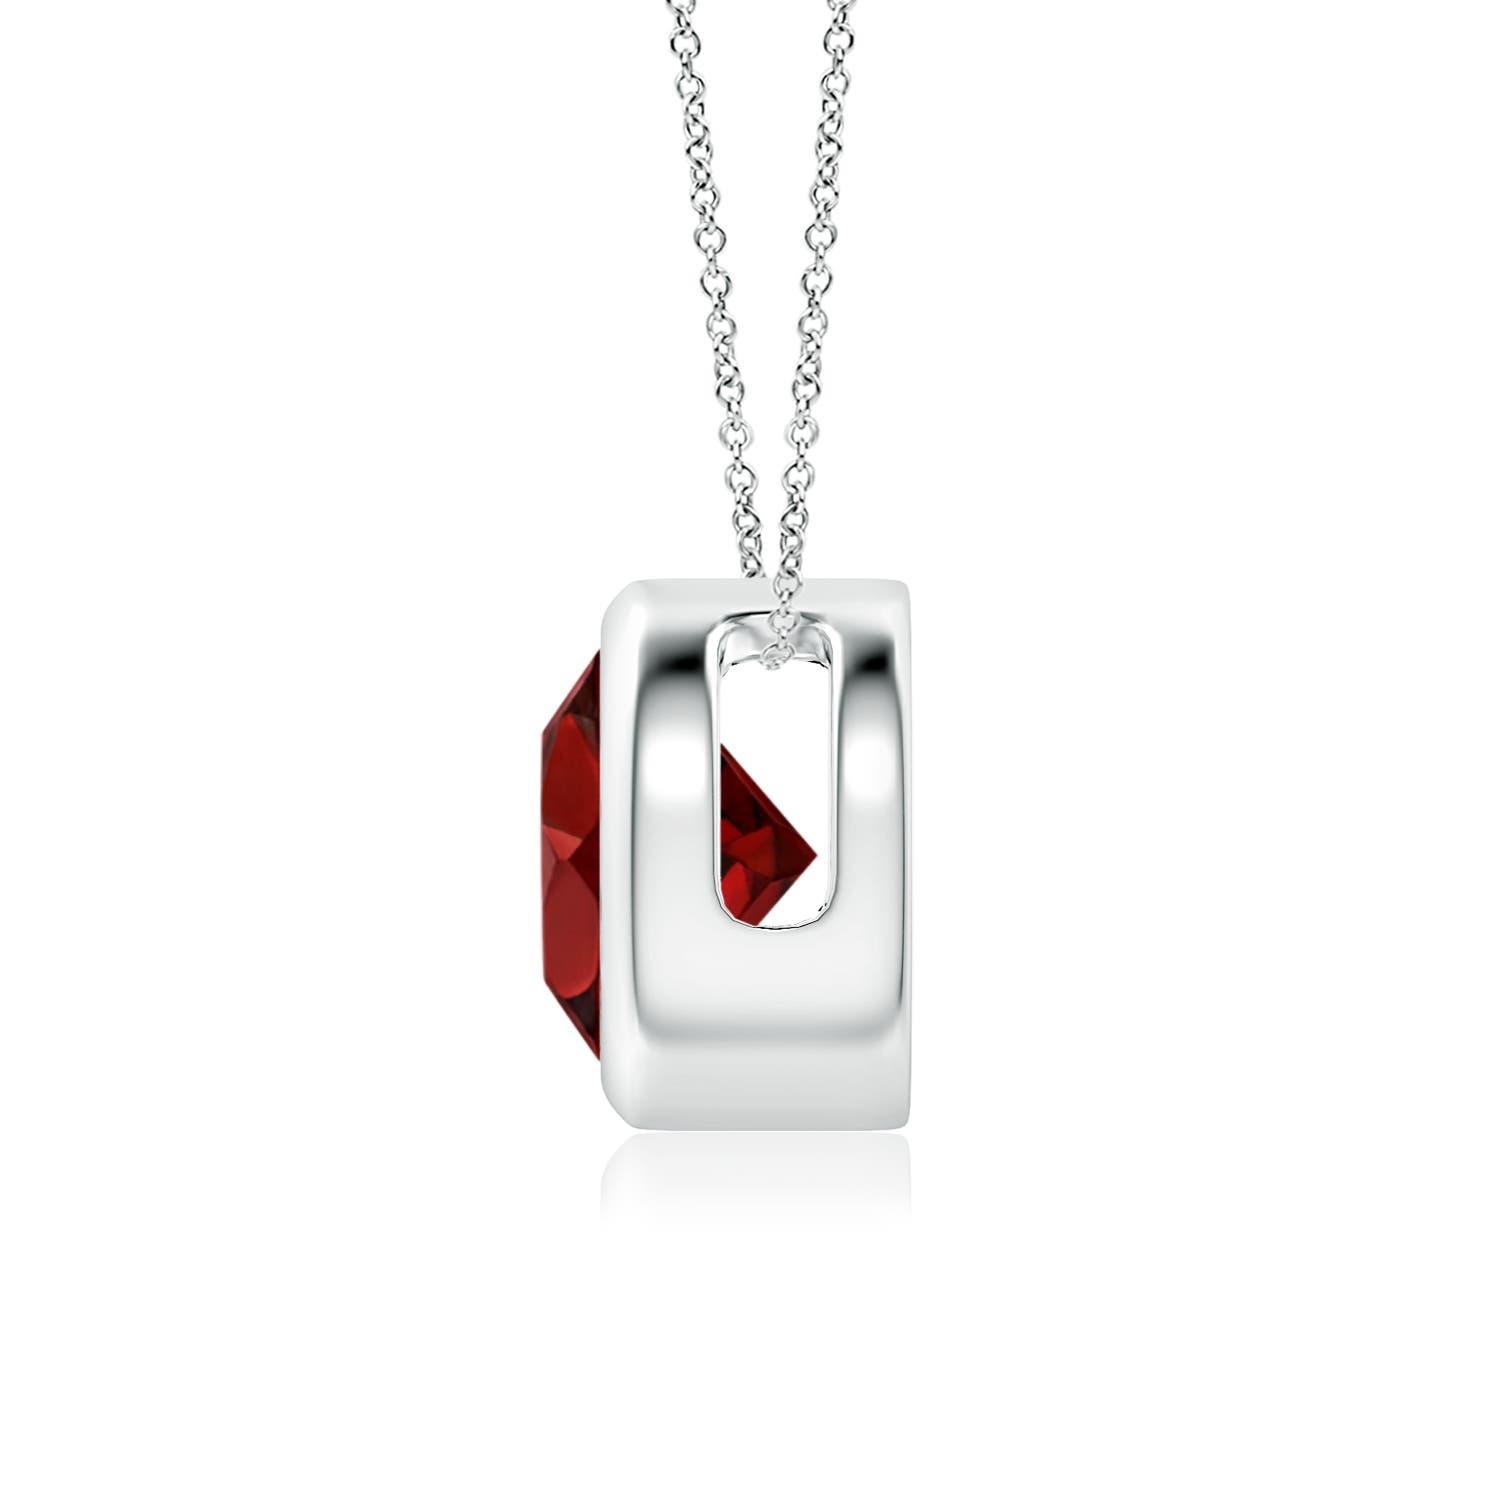 Round Cut Natural Bezel-Set Round 1.5ct Garnet Solitaire Pendant in 14K White Gold For Sale